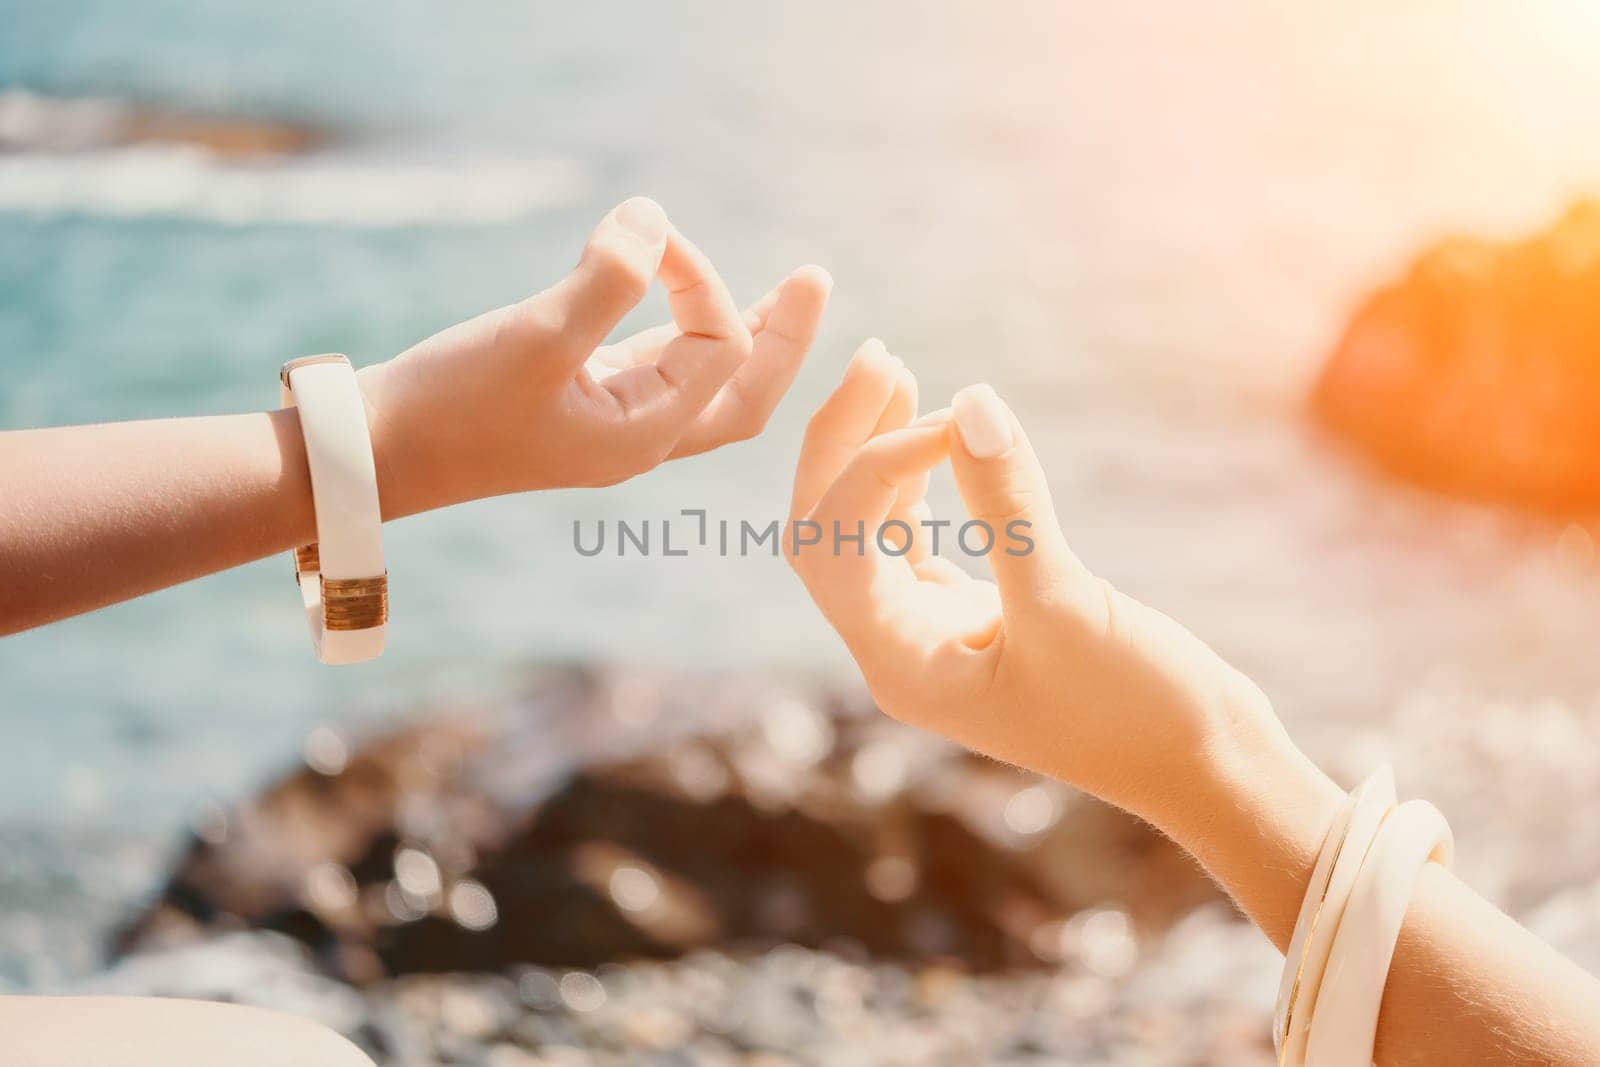 Close up Hand Gesture of Woman Doing an Outdoor Lotus Yoga Position. Close up. Blurred background